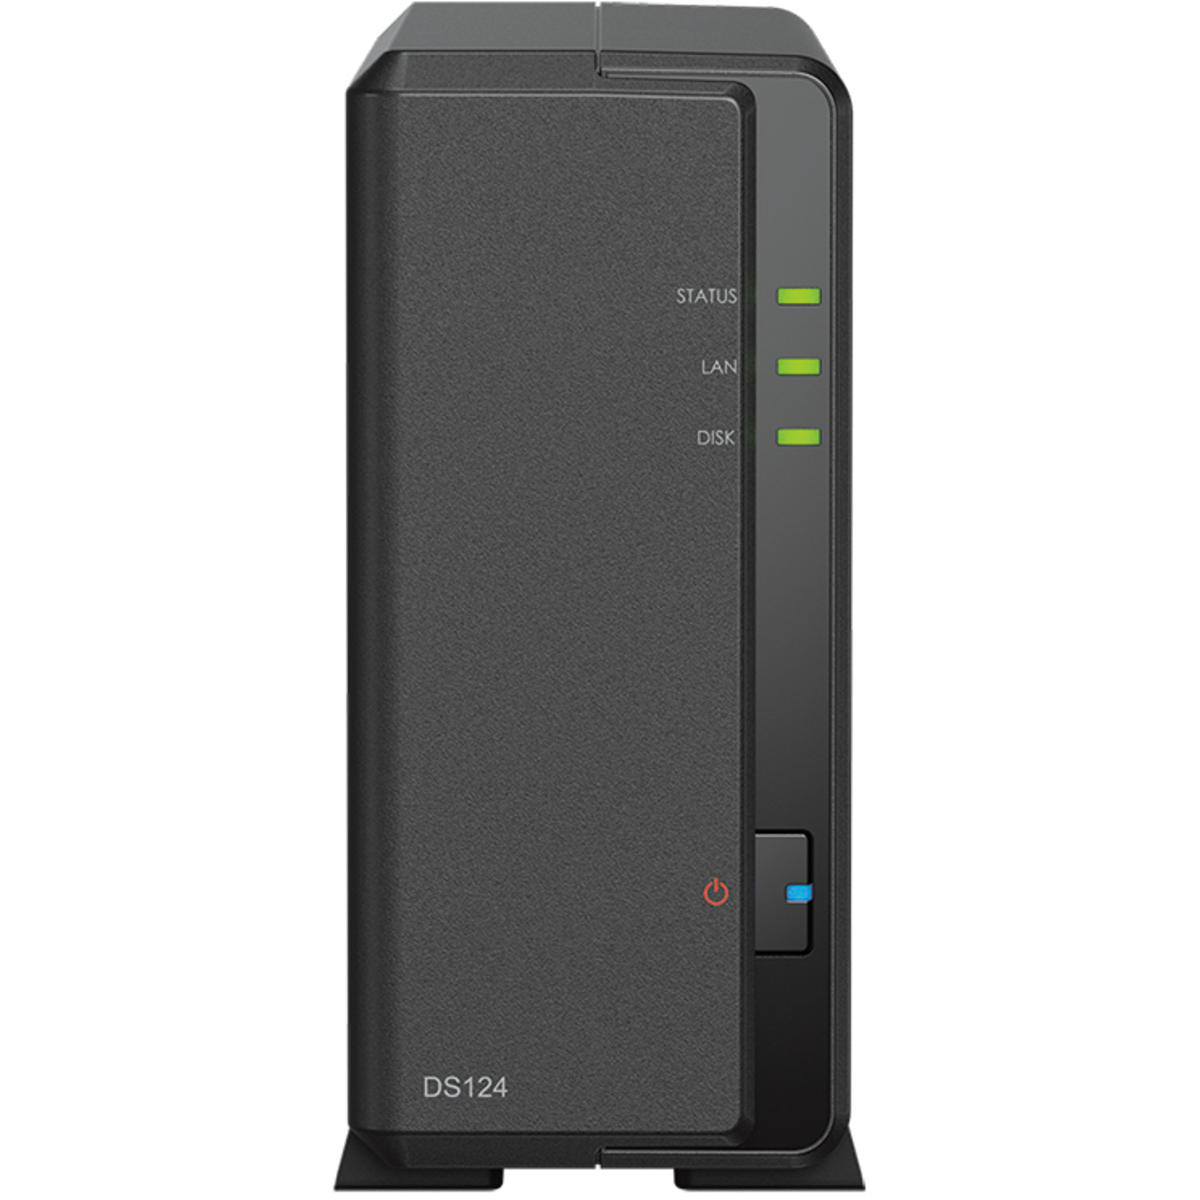 Synology DiskStation DS124 12tb 1-Bay Desktop Personal / Basic Home / Small Office NAS - Network Attached Storage Device 1x12tb Synology Plus Series HAT3310-12T 3.5 7200rpm SATA 6Gb/s HDD NAS Class Drives Installed - Burn-In Tested DiskStation DS124